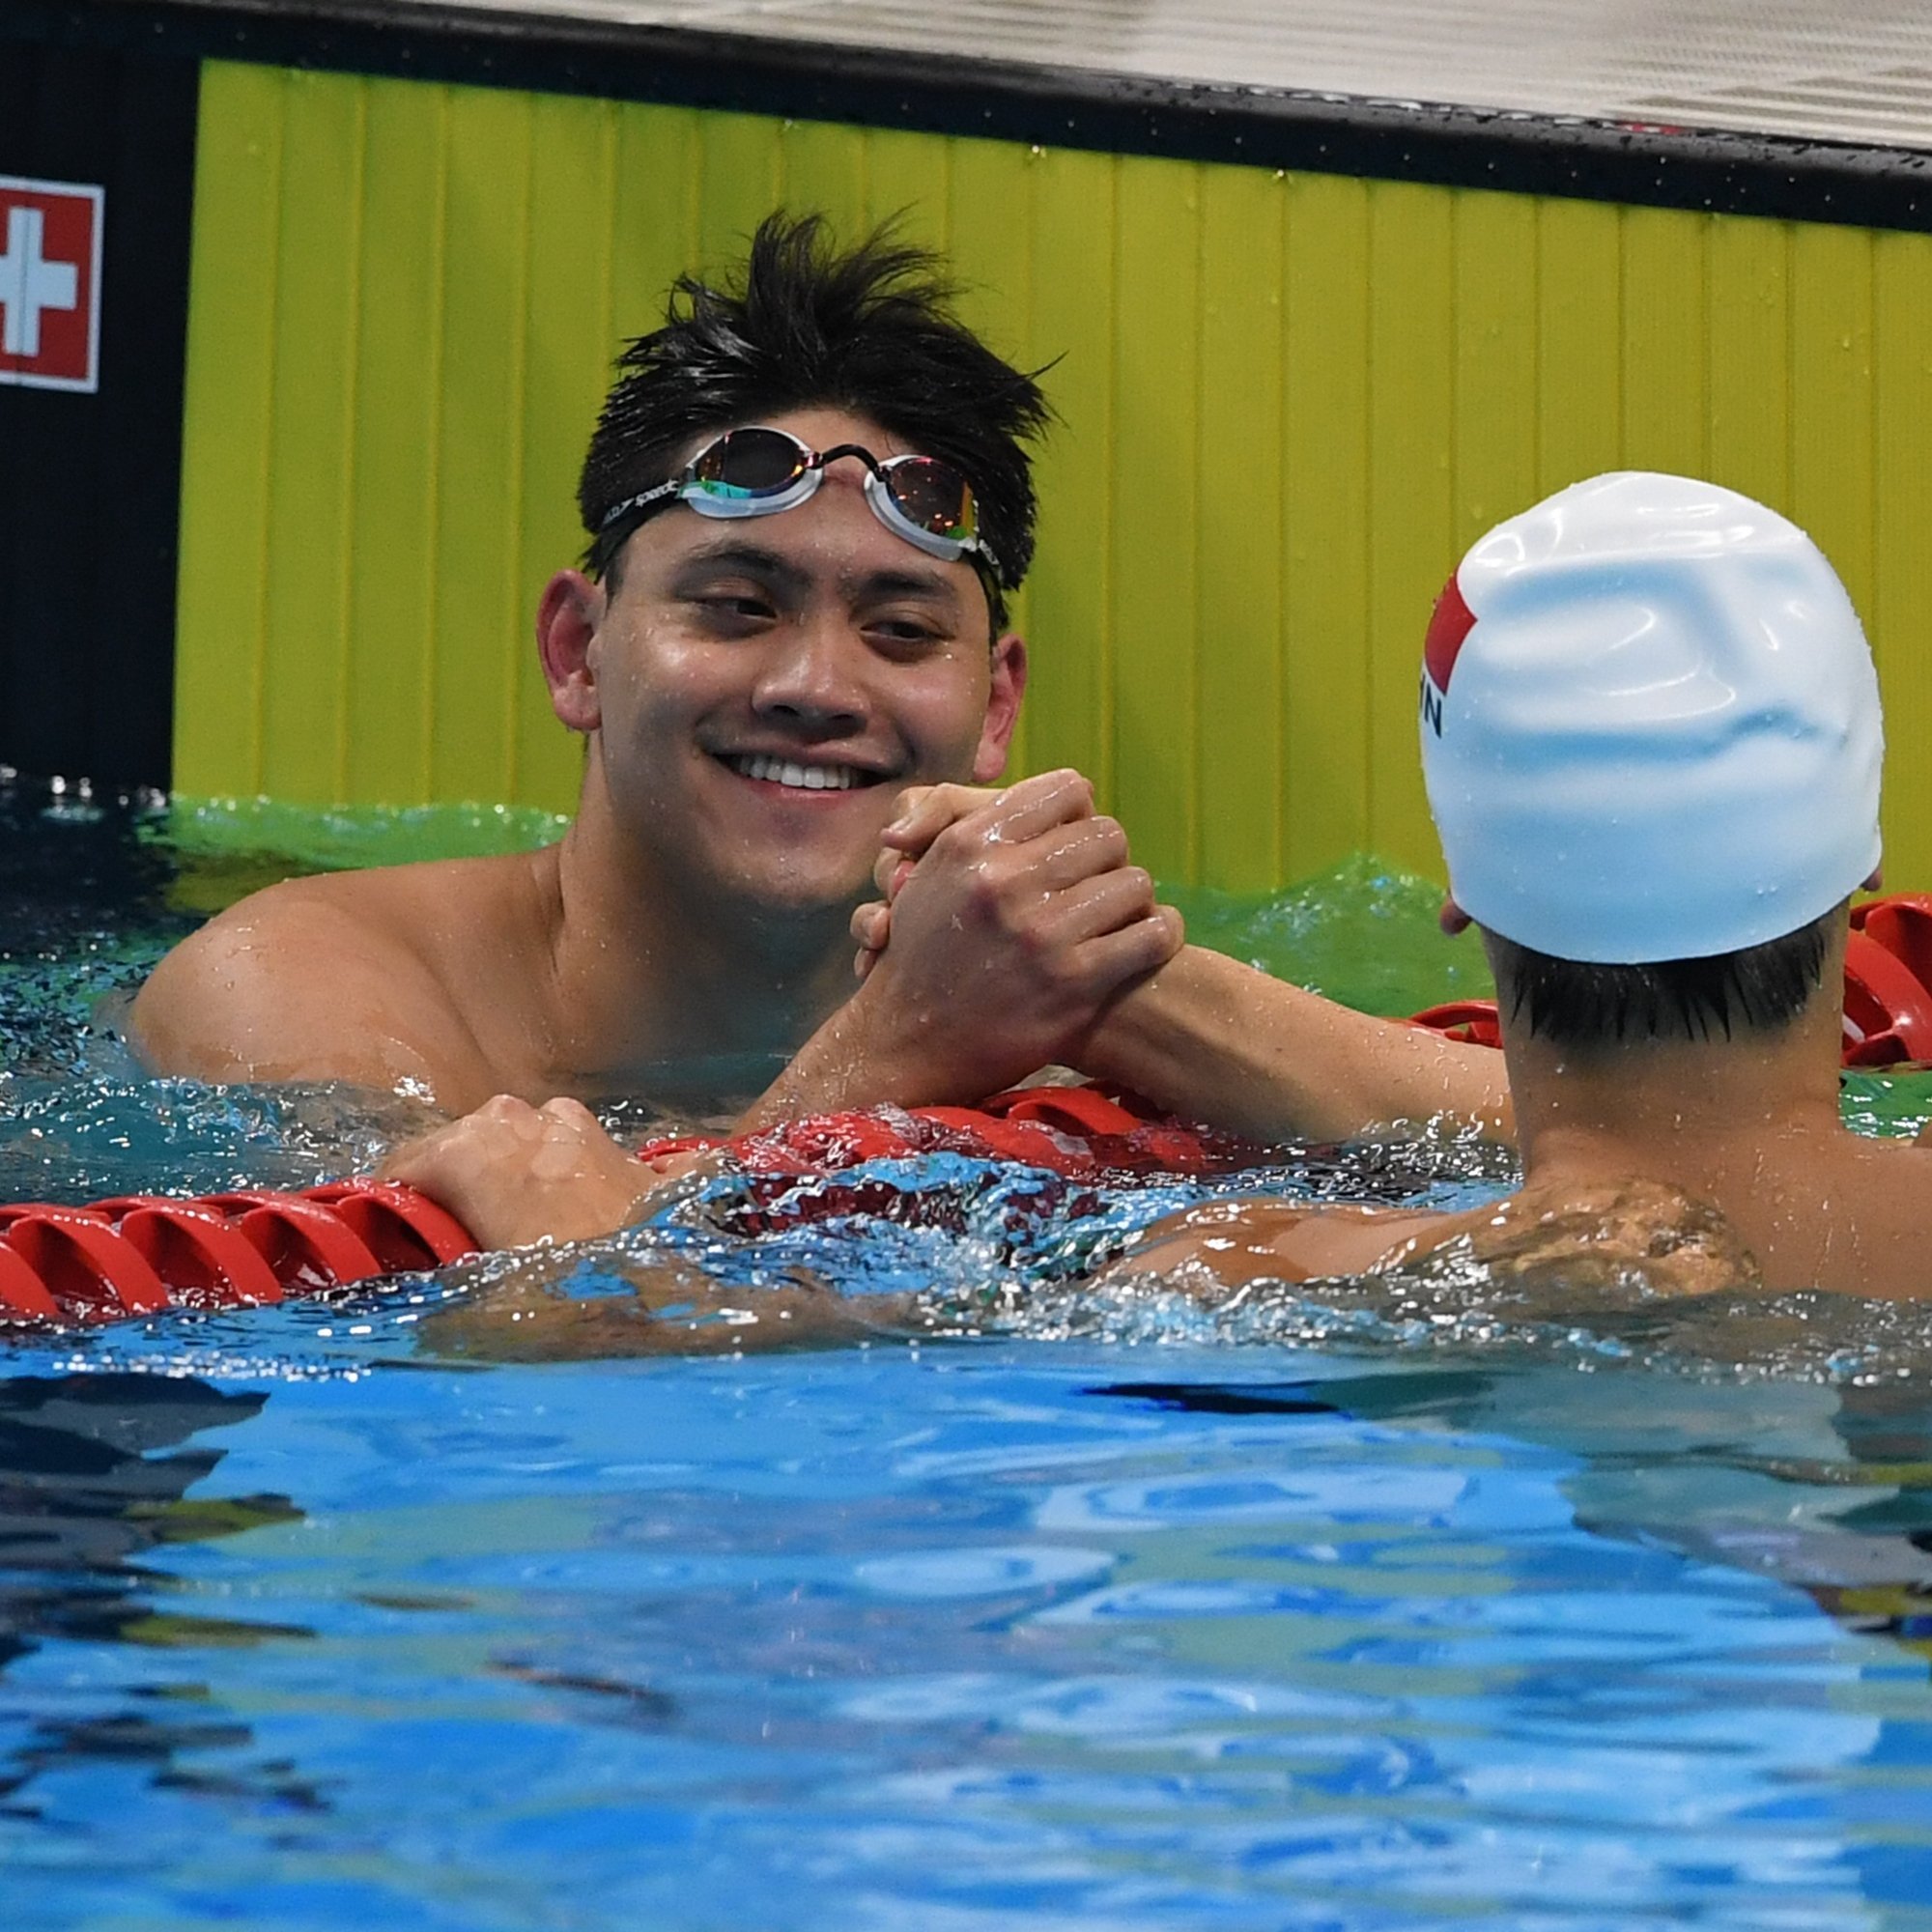 Joseph Schooling issues 200m swimming challenge, free boss suit for anyone WHO beats him